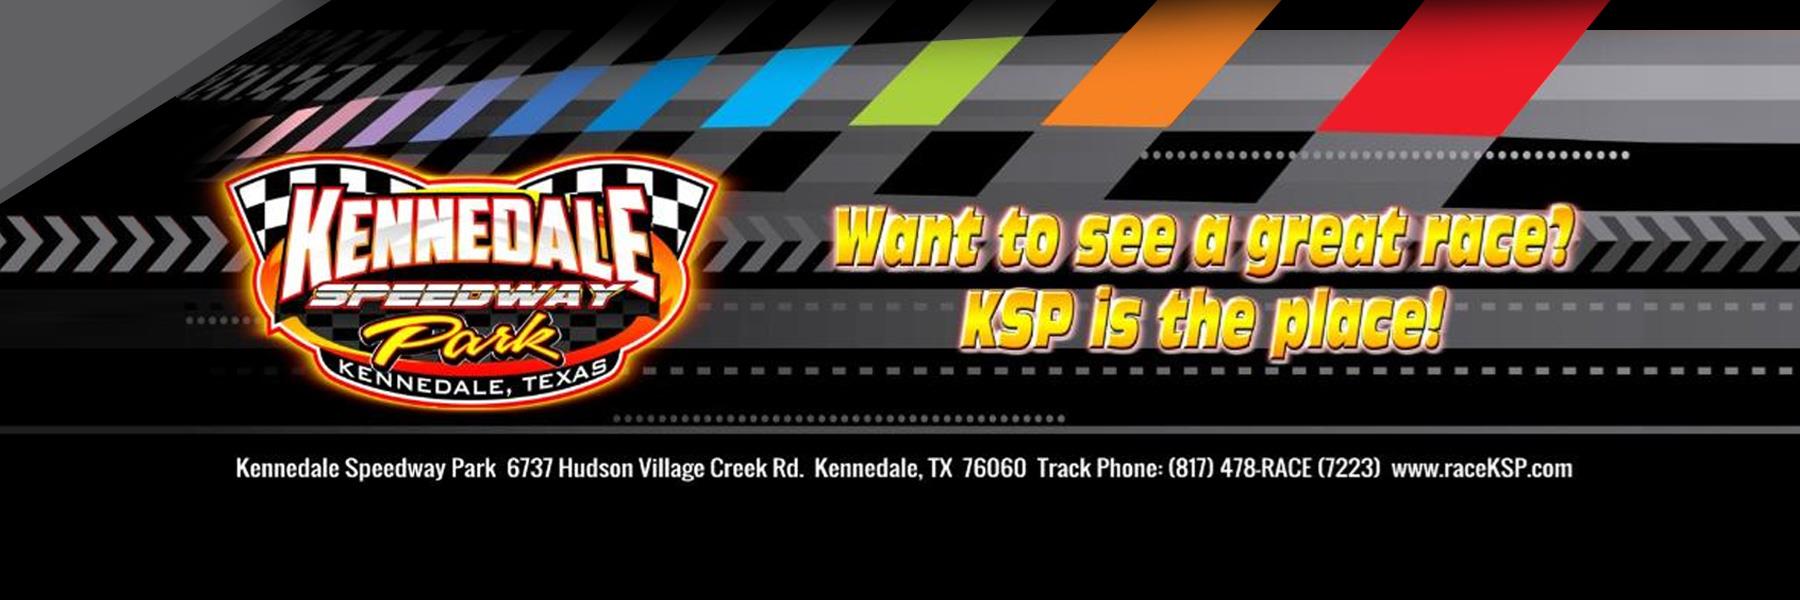 5/14/2022 - Kennedale Speedway Park